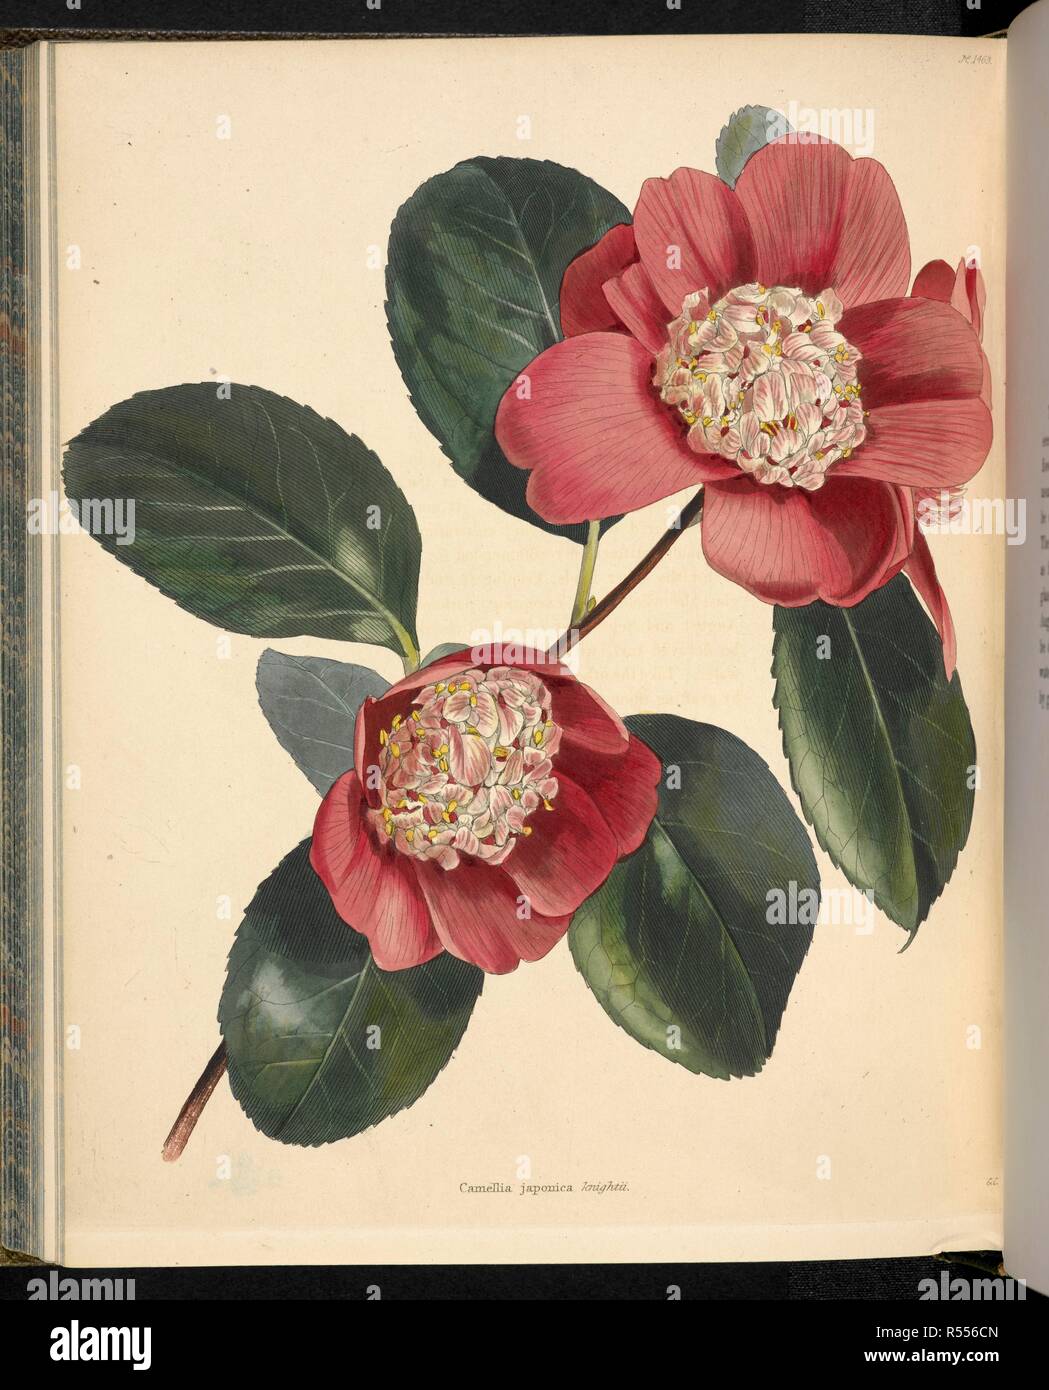 Camellia japonica knightii. The Botanical Cabinet, consisting of coloured delineations of plants, from all countries, with a short account of each, etc. By C. Loddiges and Sons ... The plates by G. Cooke. vol. 1-20. London, 1817-33. Source: 443.b.19, vol.15, no.1463. Author: Cooke, George. Stock Photo